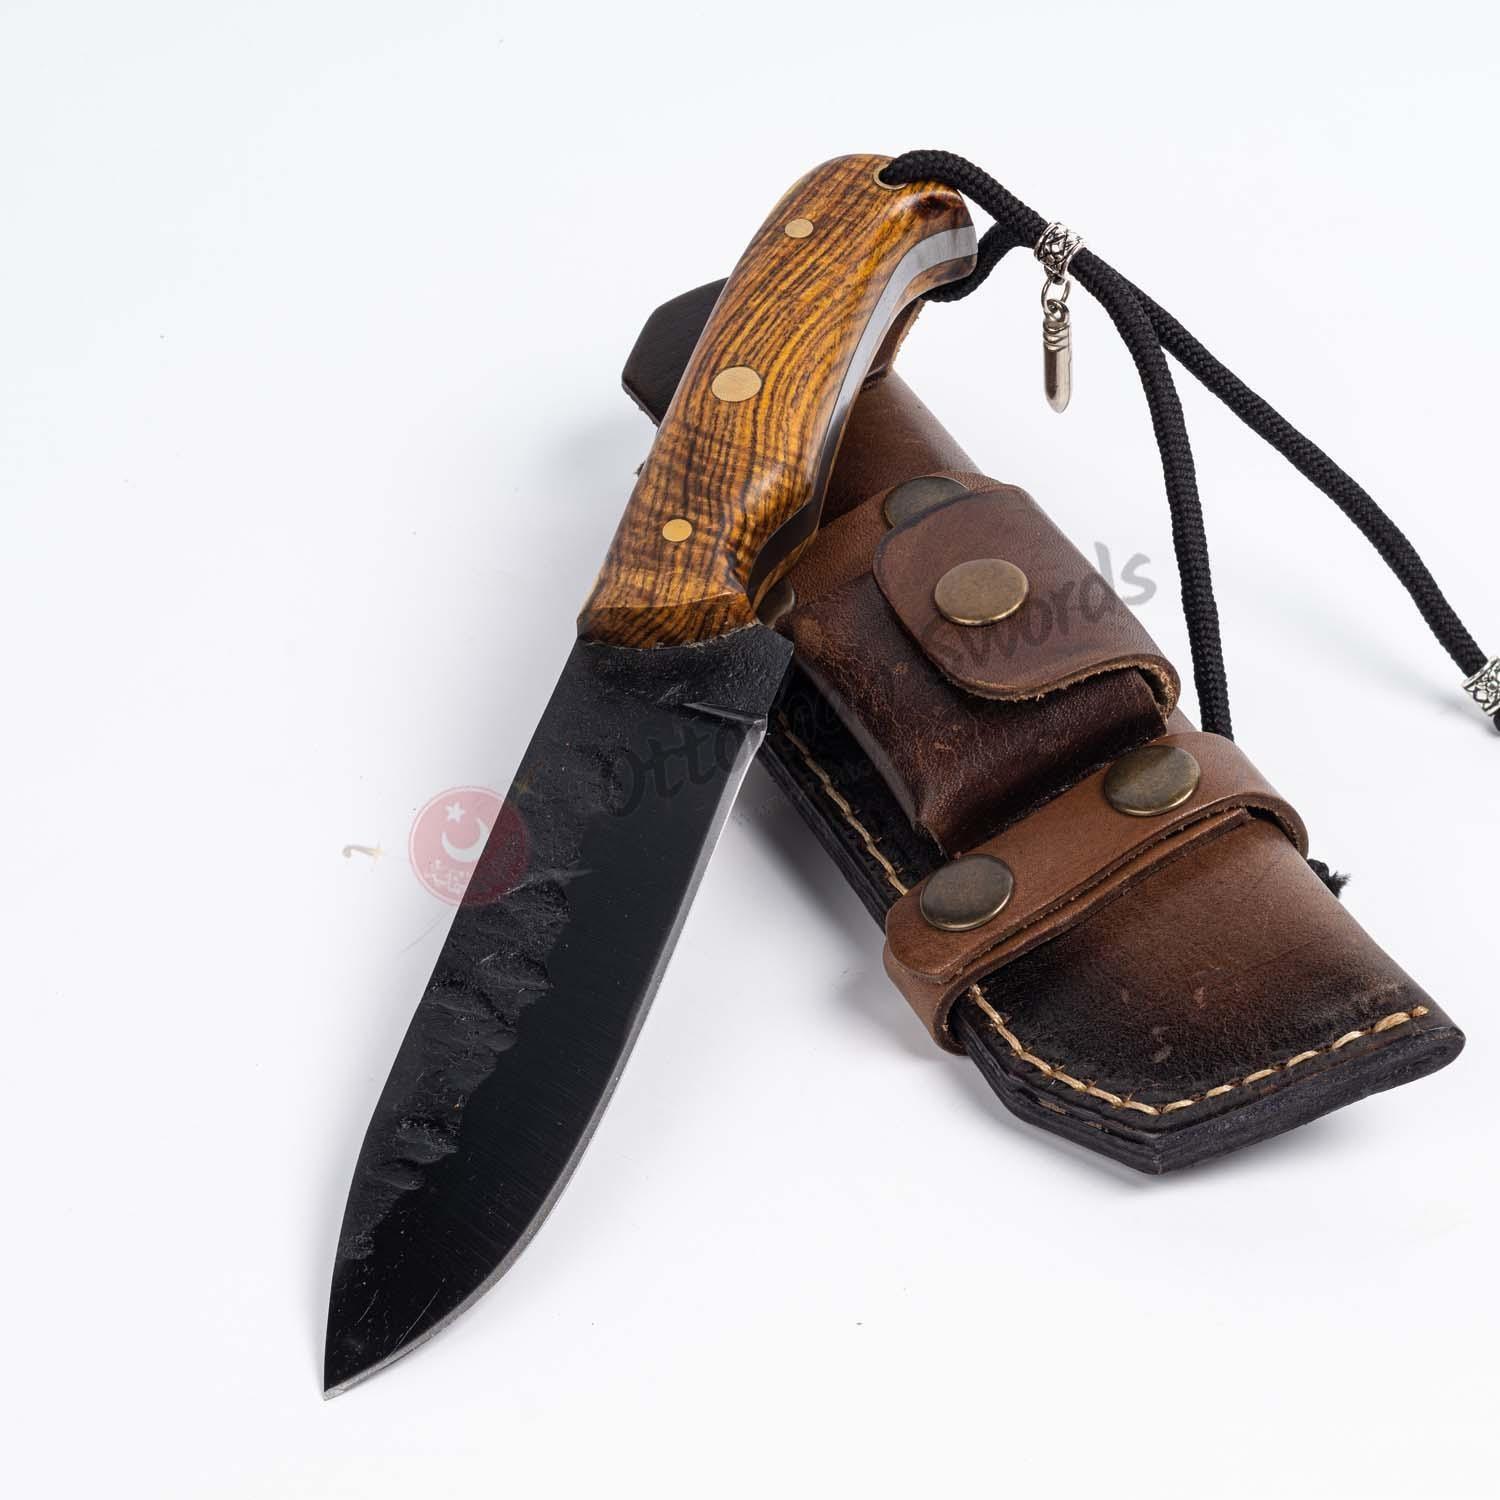 Hand Forged Black Blade Survival Knife Wooden Handle (4)